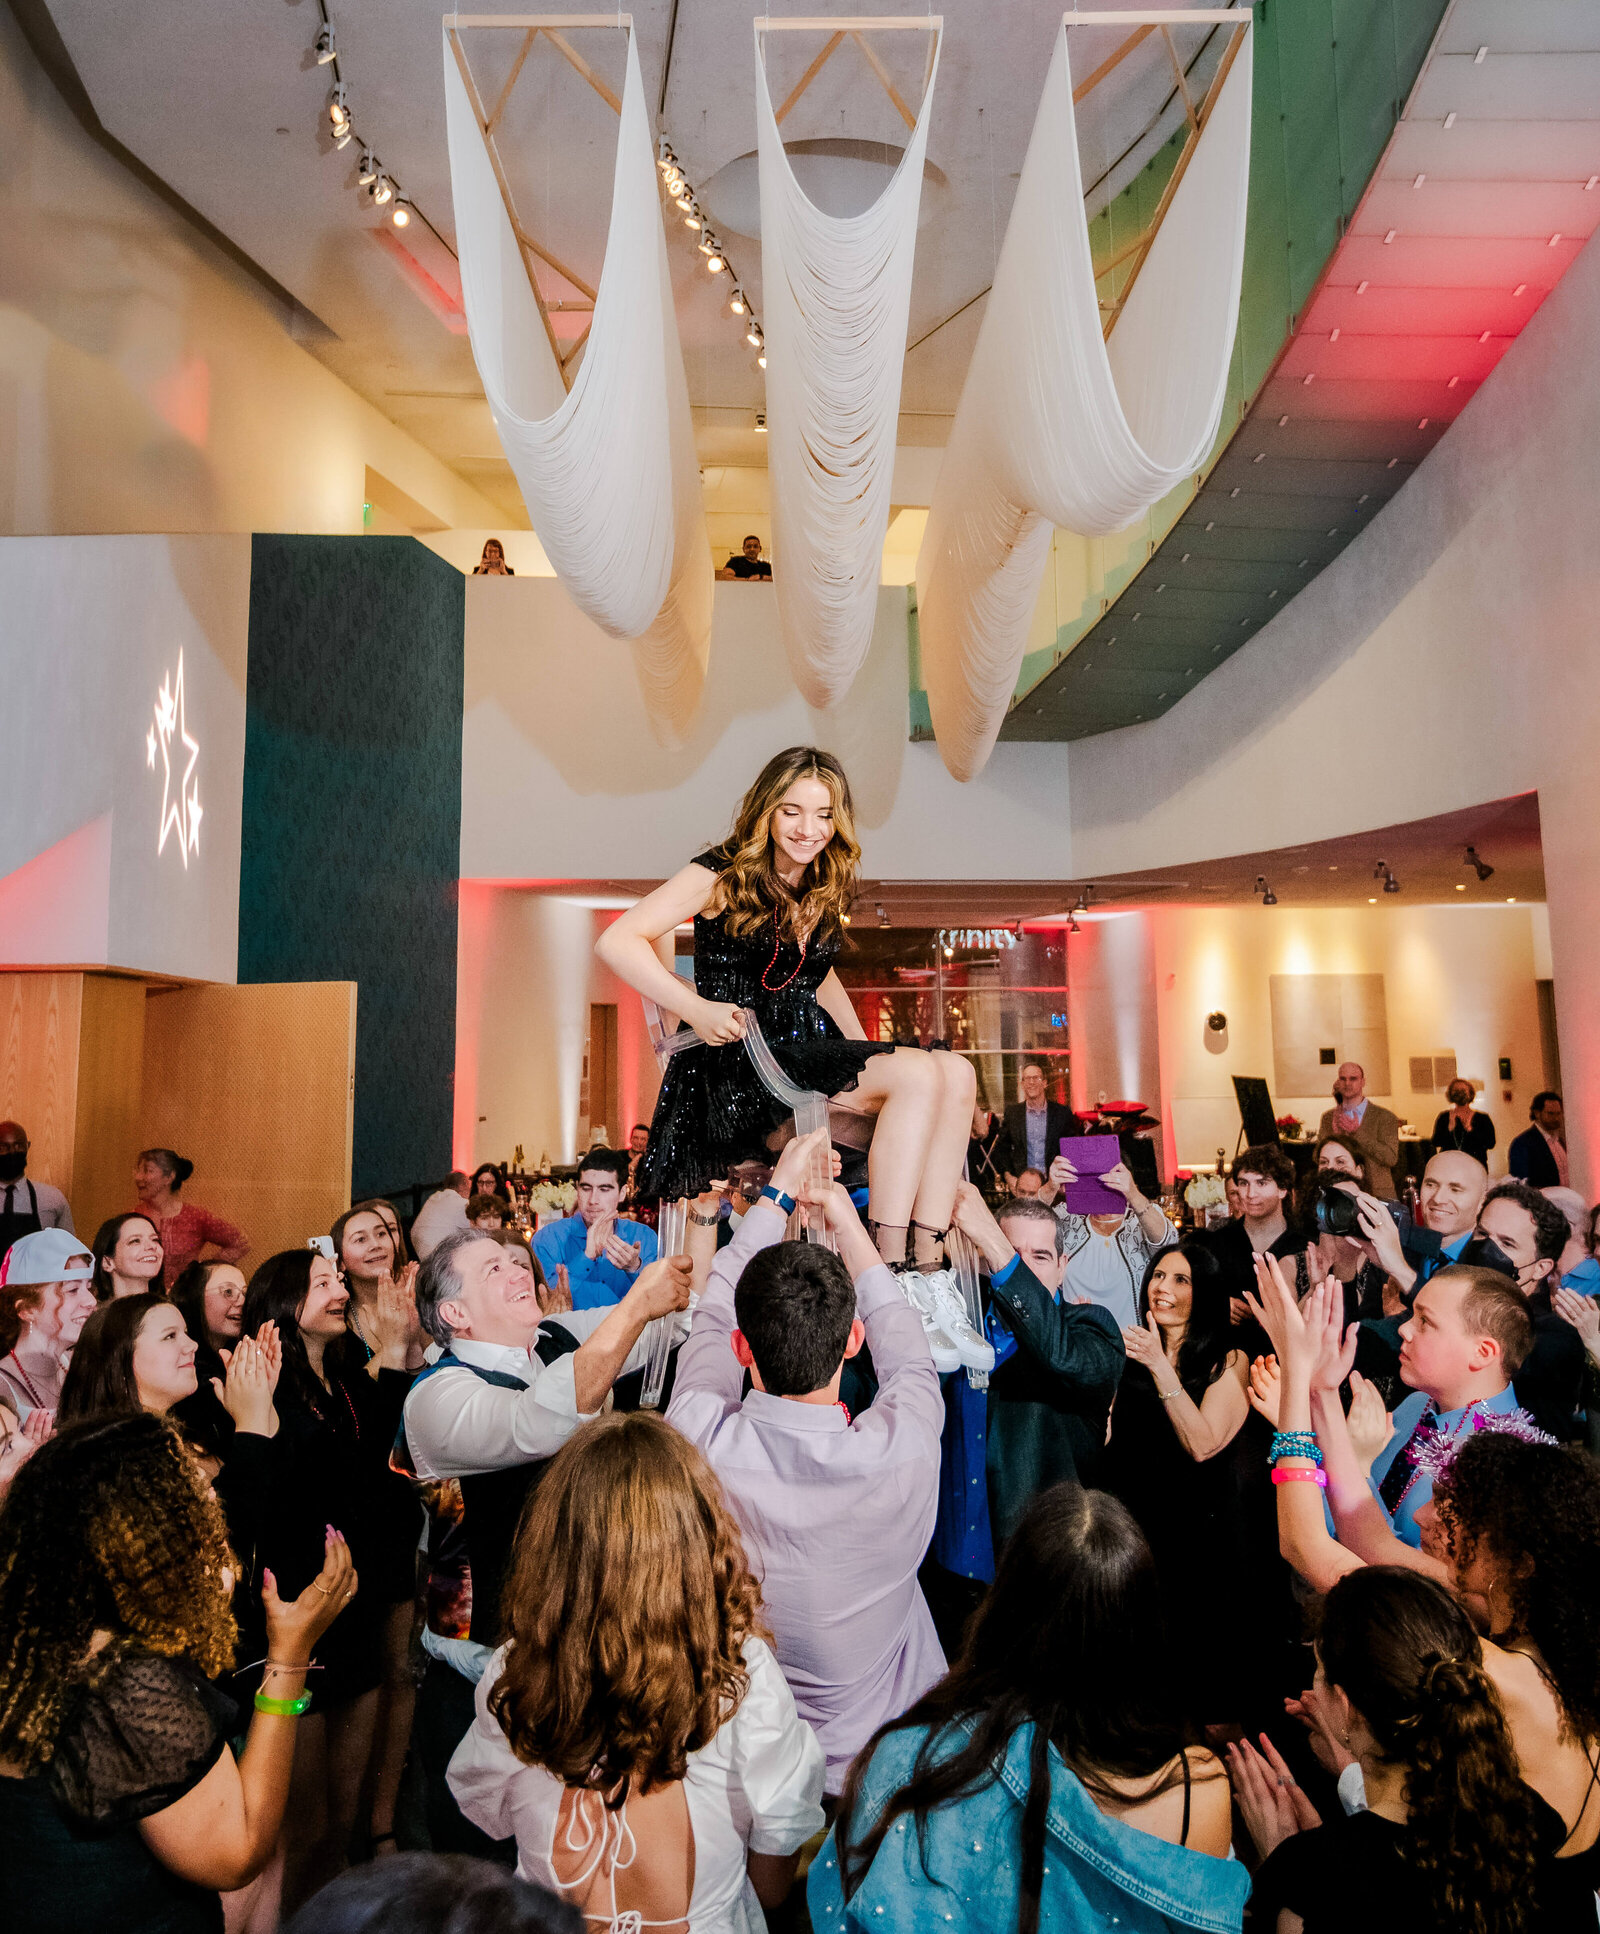 A Bellevue Bar and Bat Mitzvah Photography image of a crowded dance floor lifting the teen girl in a chair and celebrating